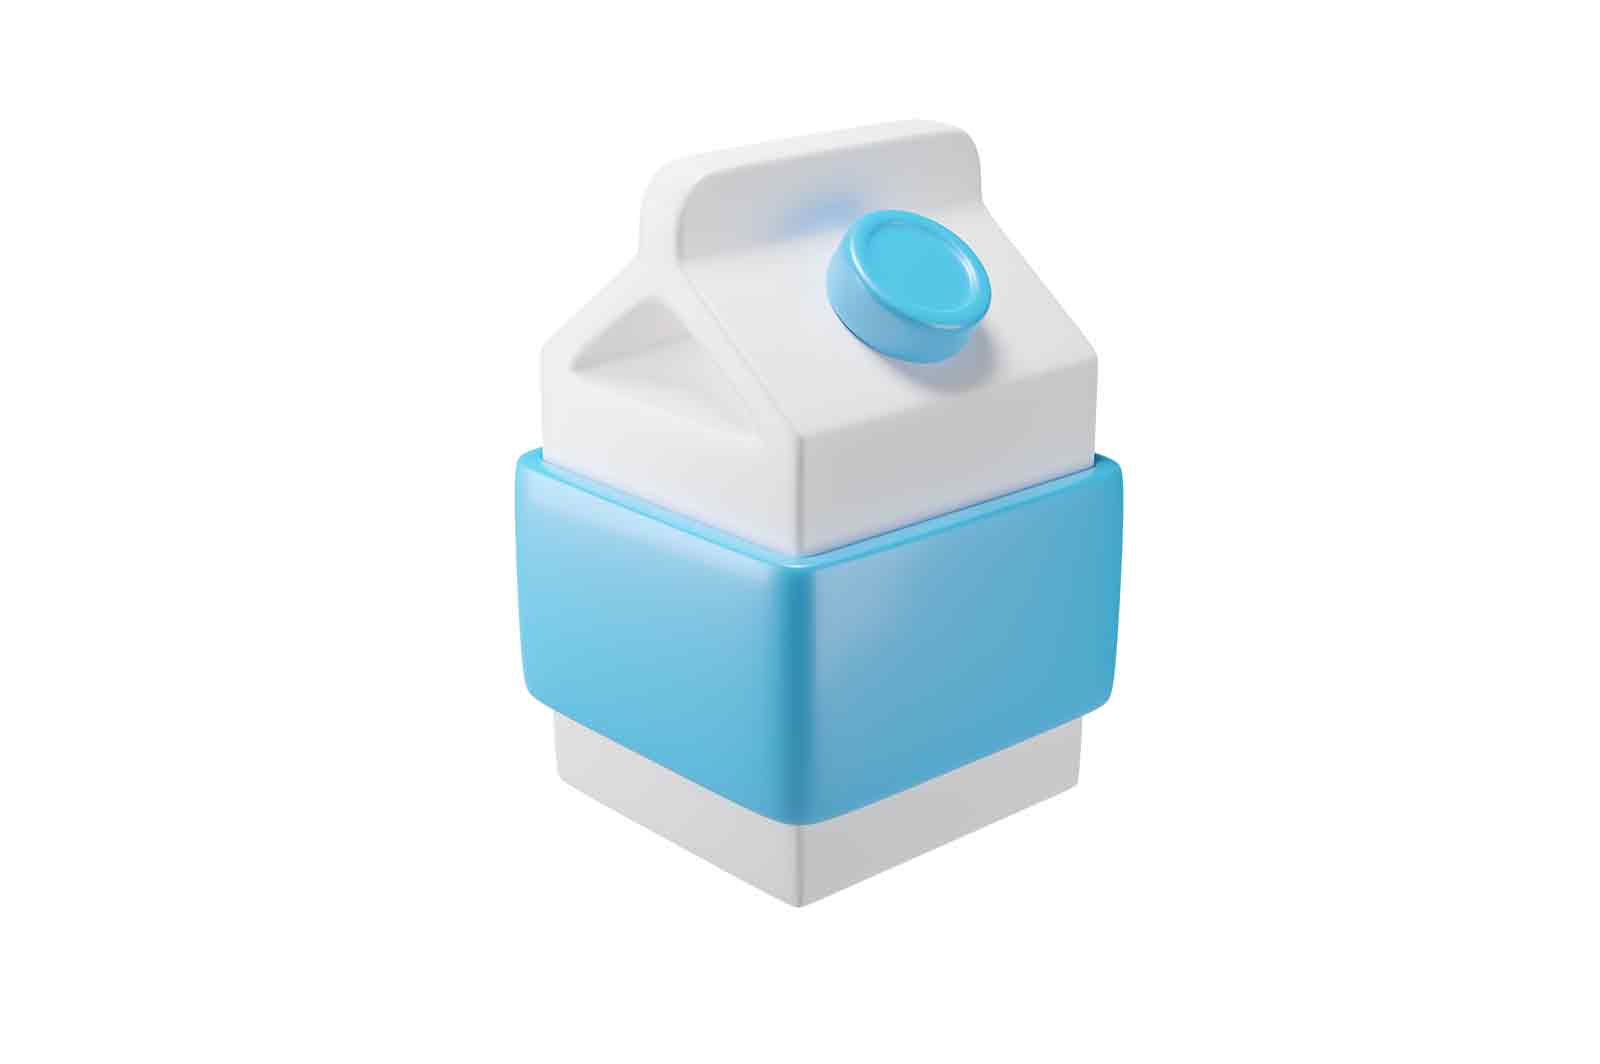 Milk carton, 3d rendered illustration of a small blue and white plastic container with a handle.